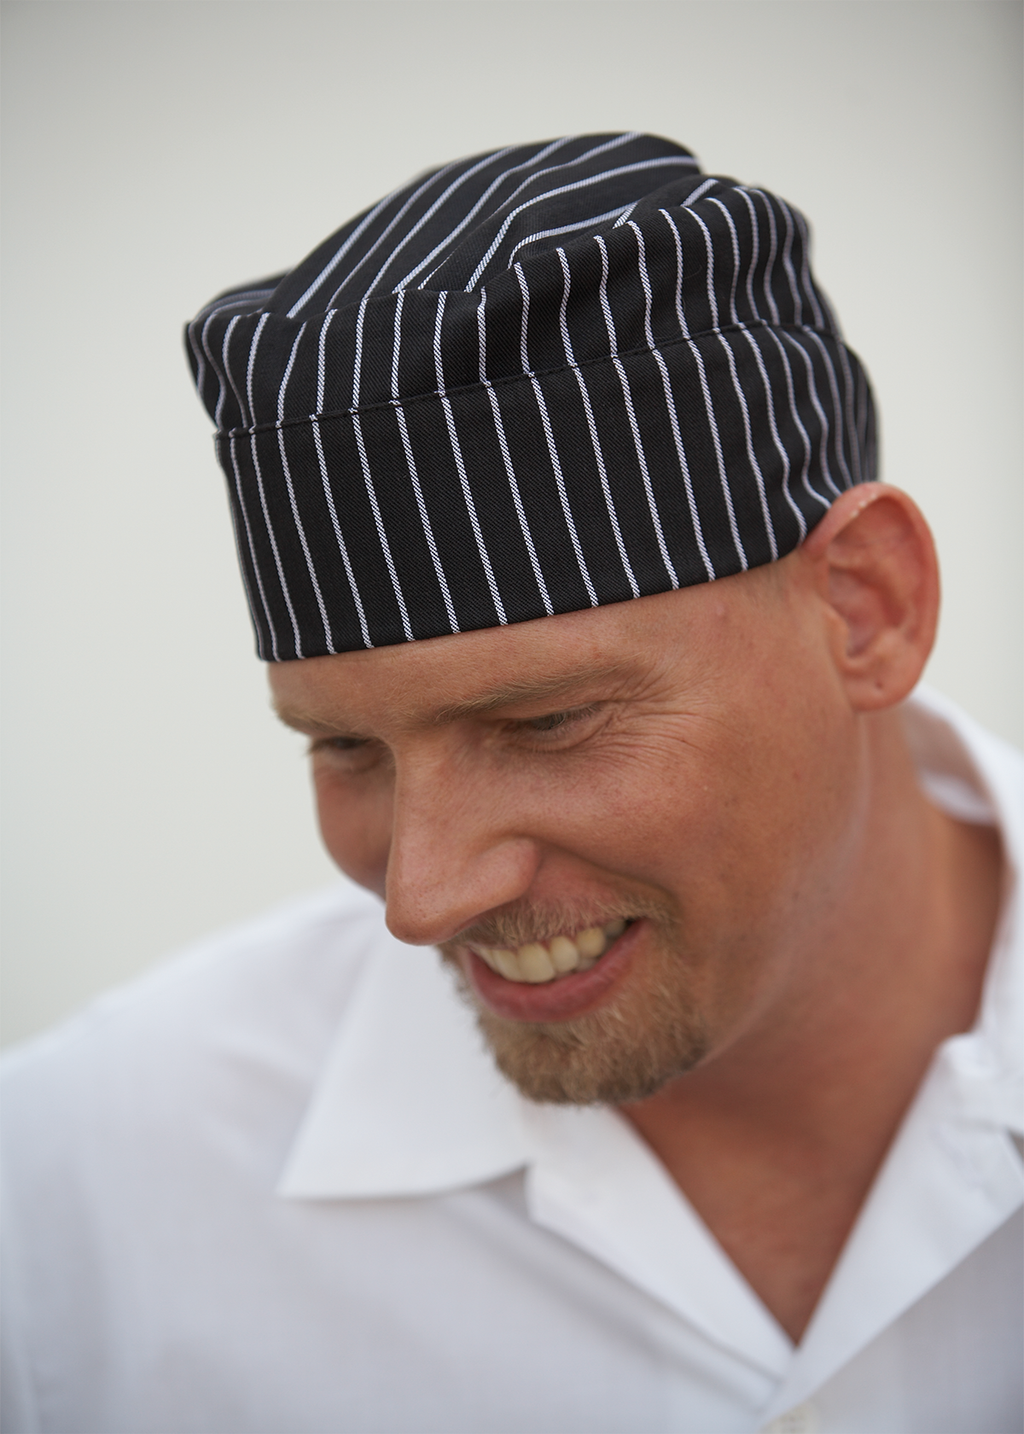 Product - Gangster Stripe Pillbox MOBB Chef Hat - Featured Image